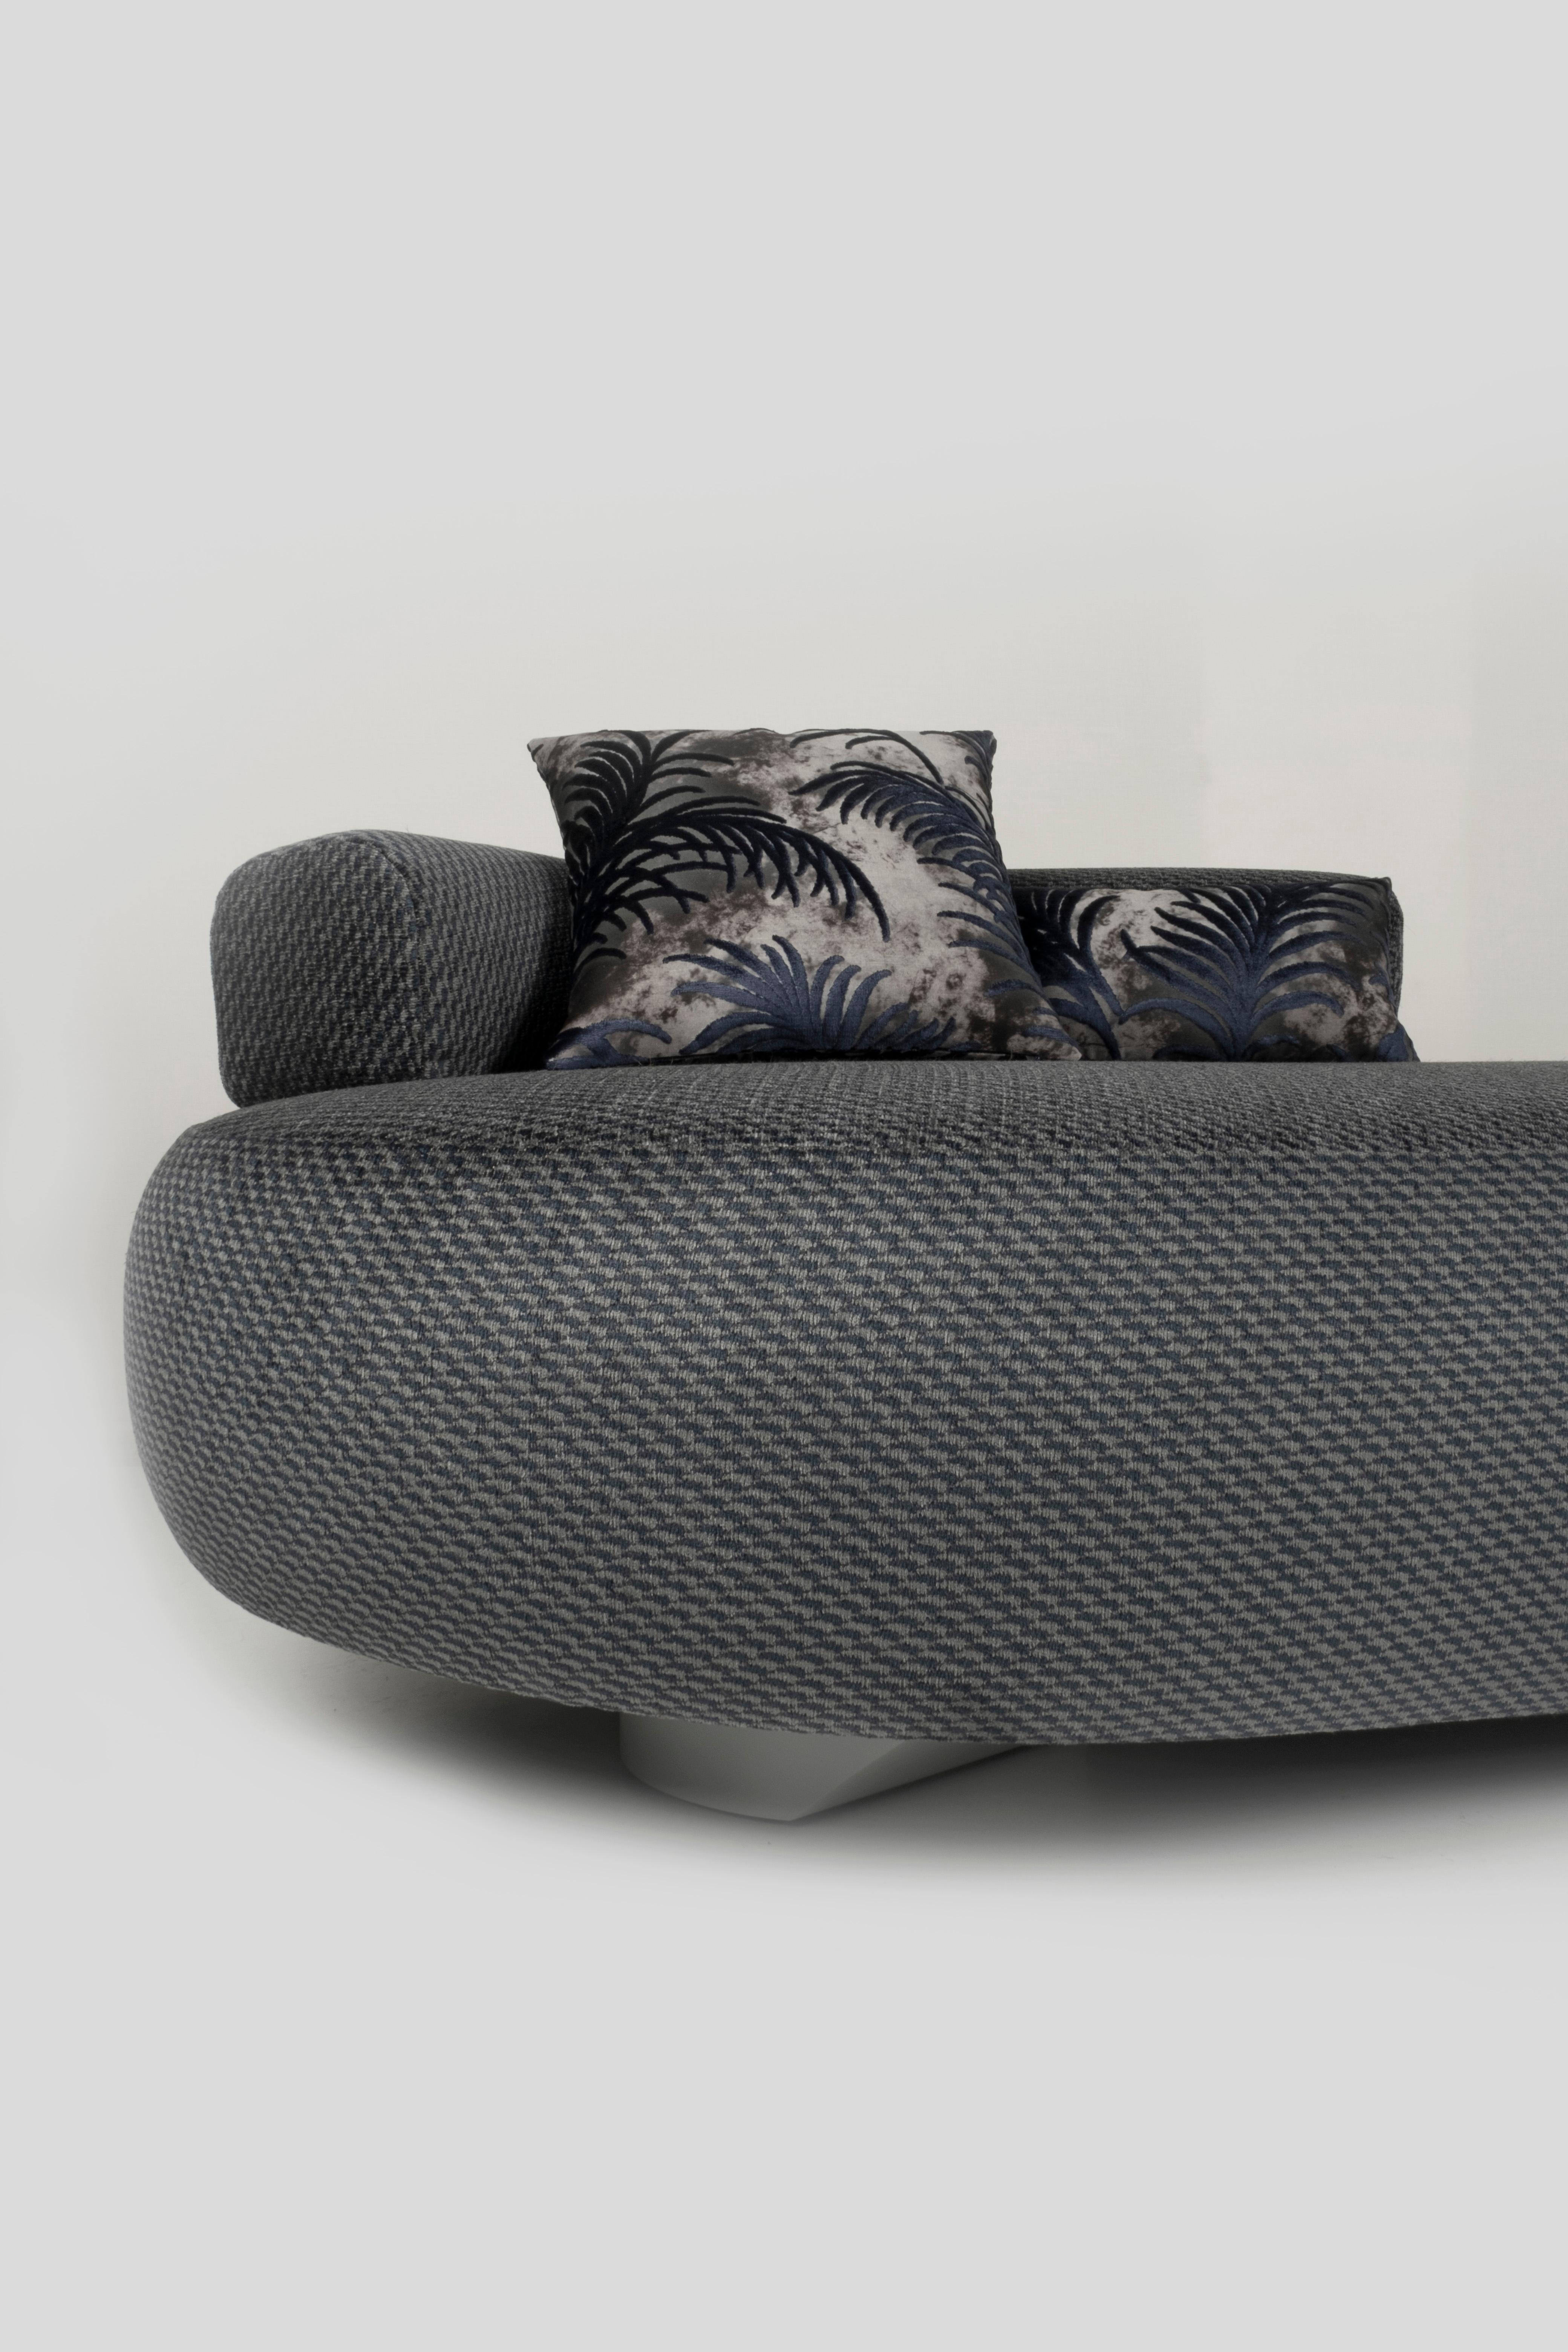 Modern Twins Chaise Lounge, Grey Linen, Handmade in Portugal by Greenapple For Sale 2